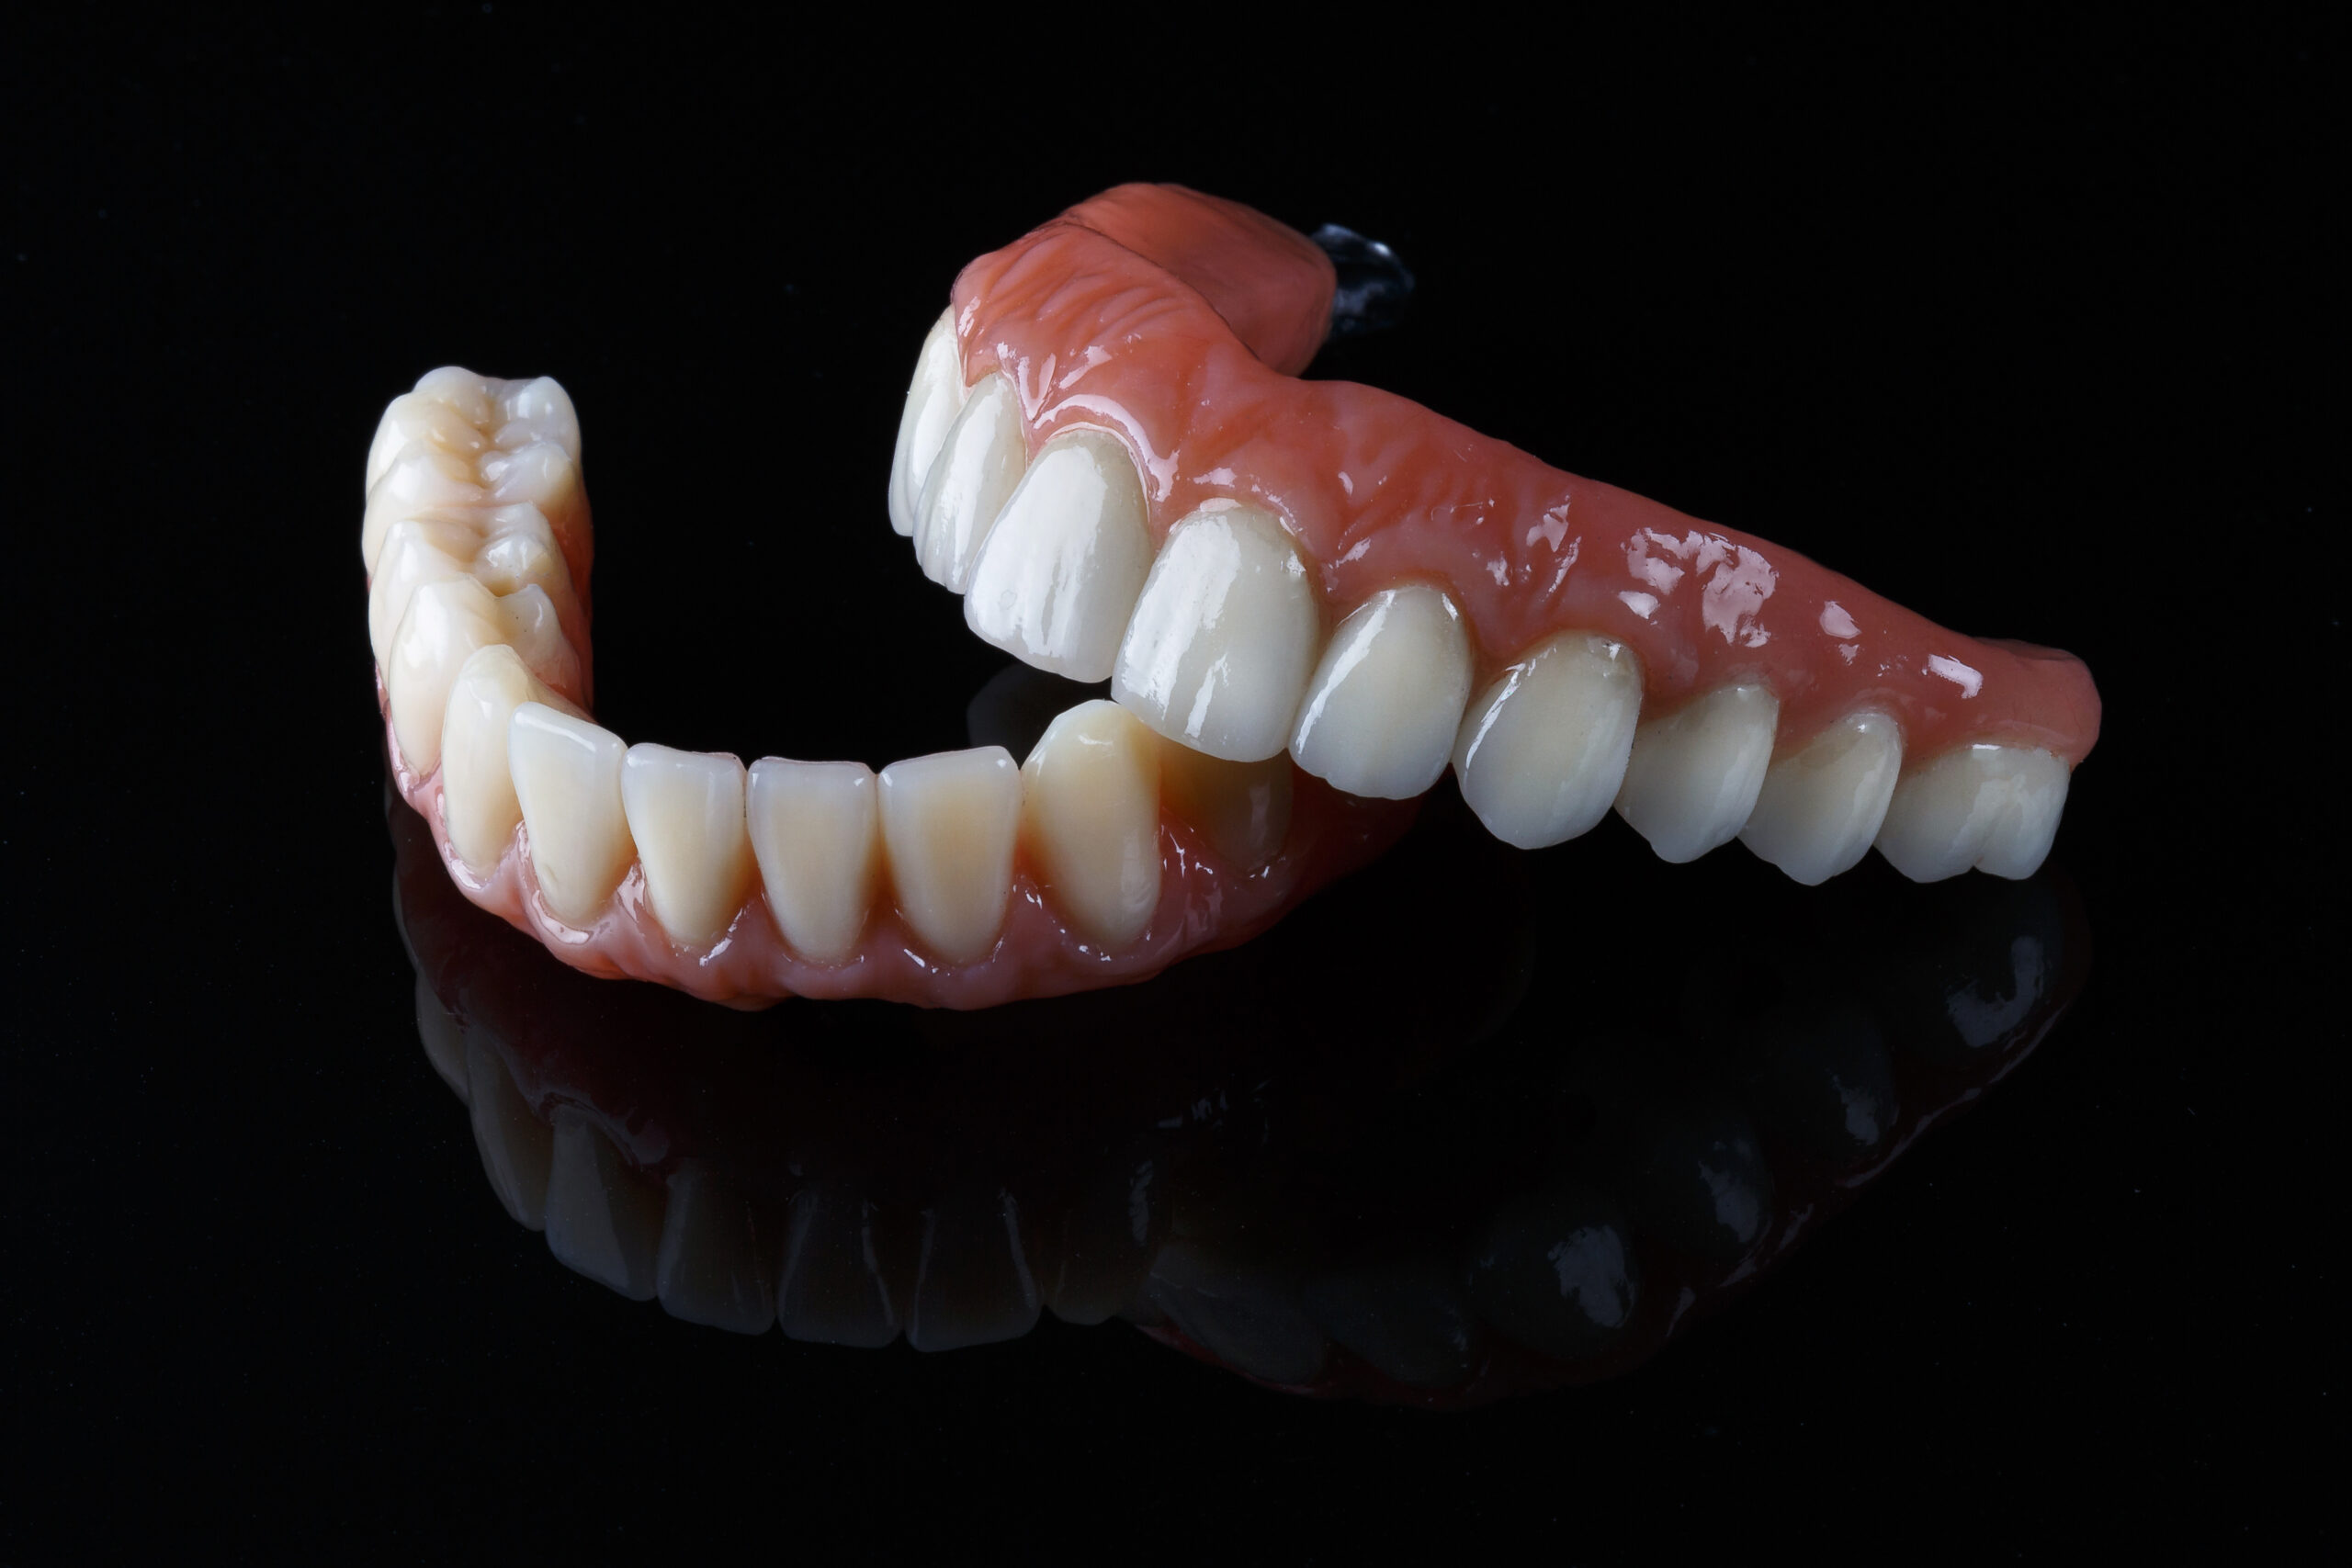 ceramic prosthesis with artificial gums, upper and lower jaw on black glass.